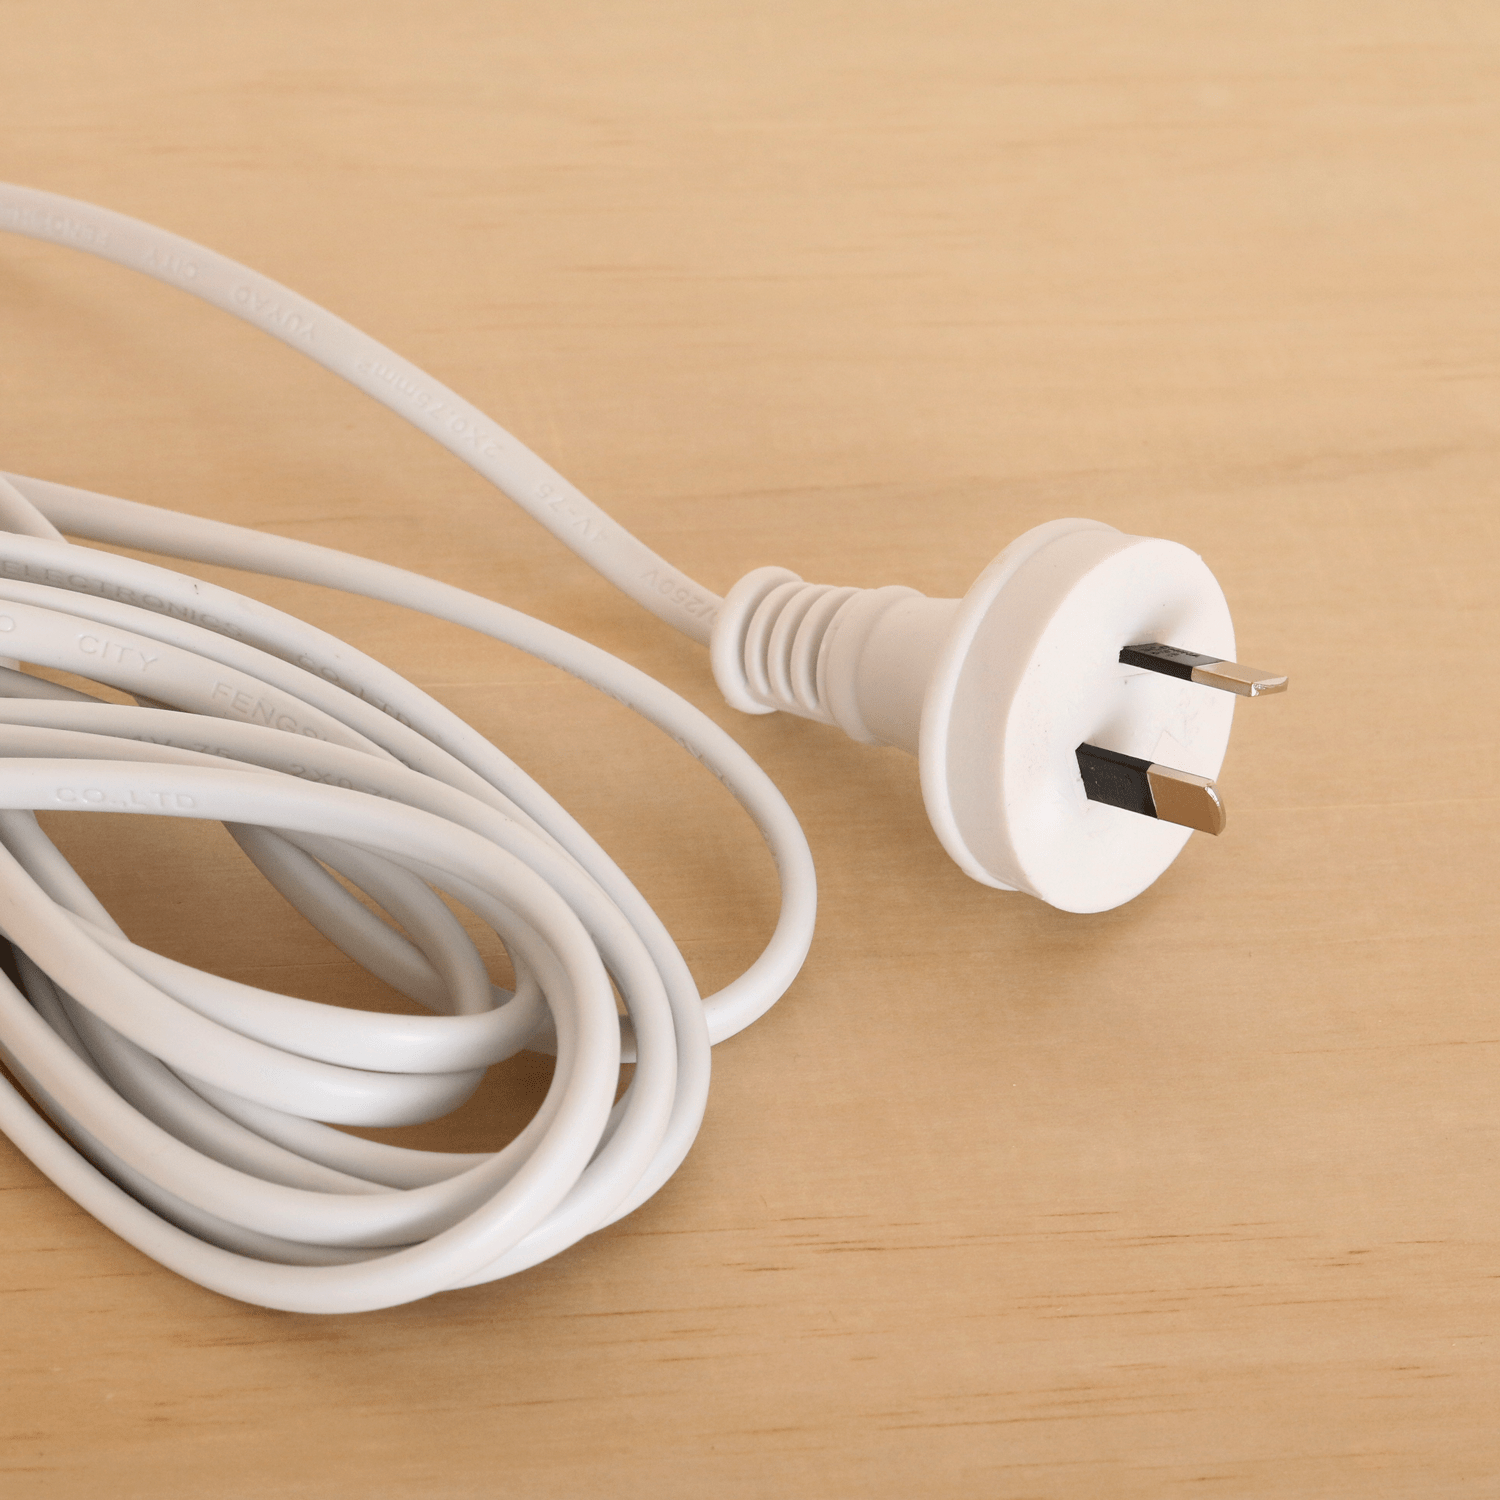 A white electrical cord 